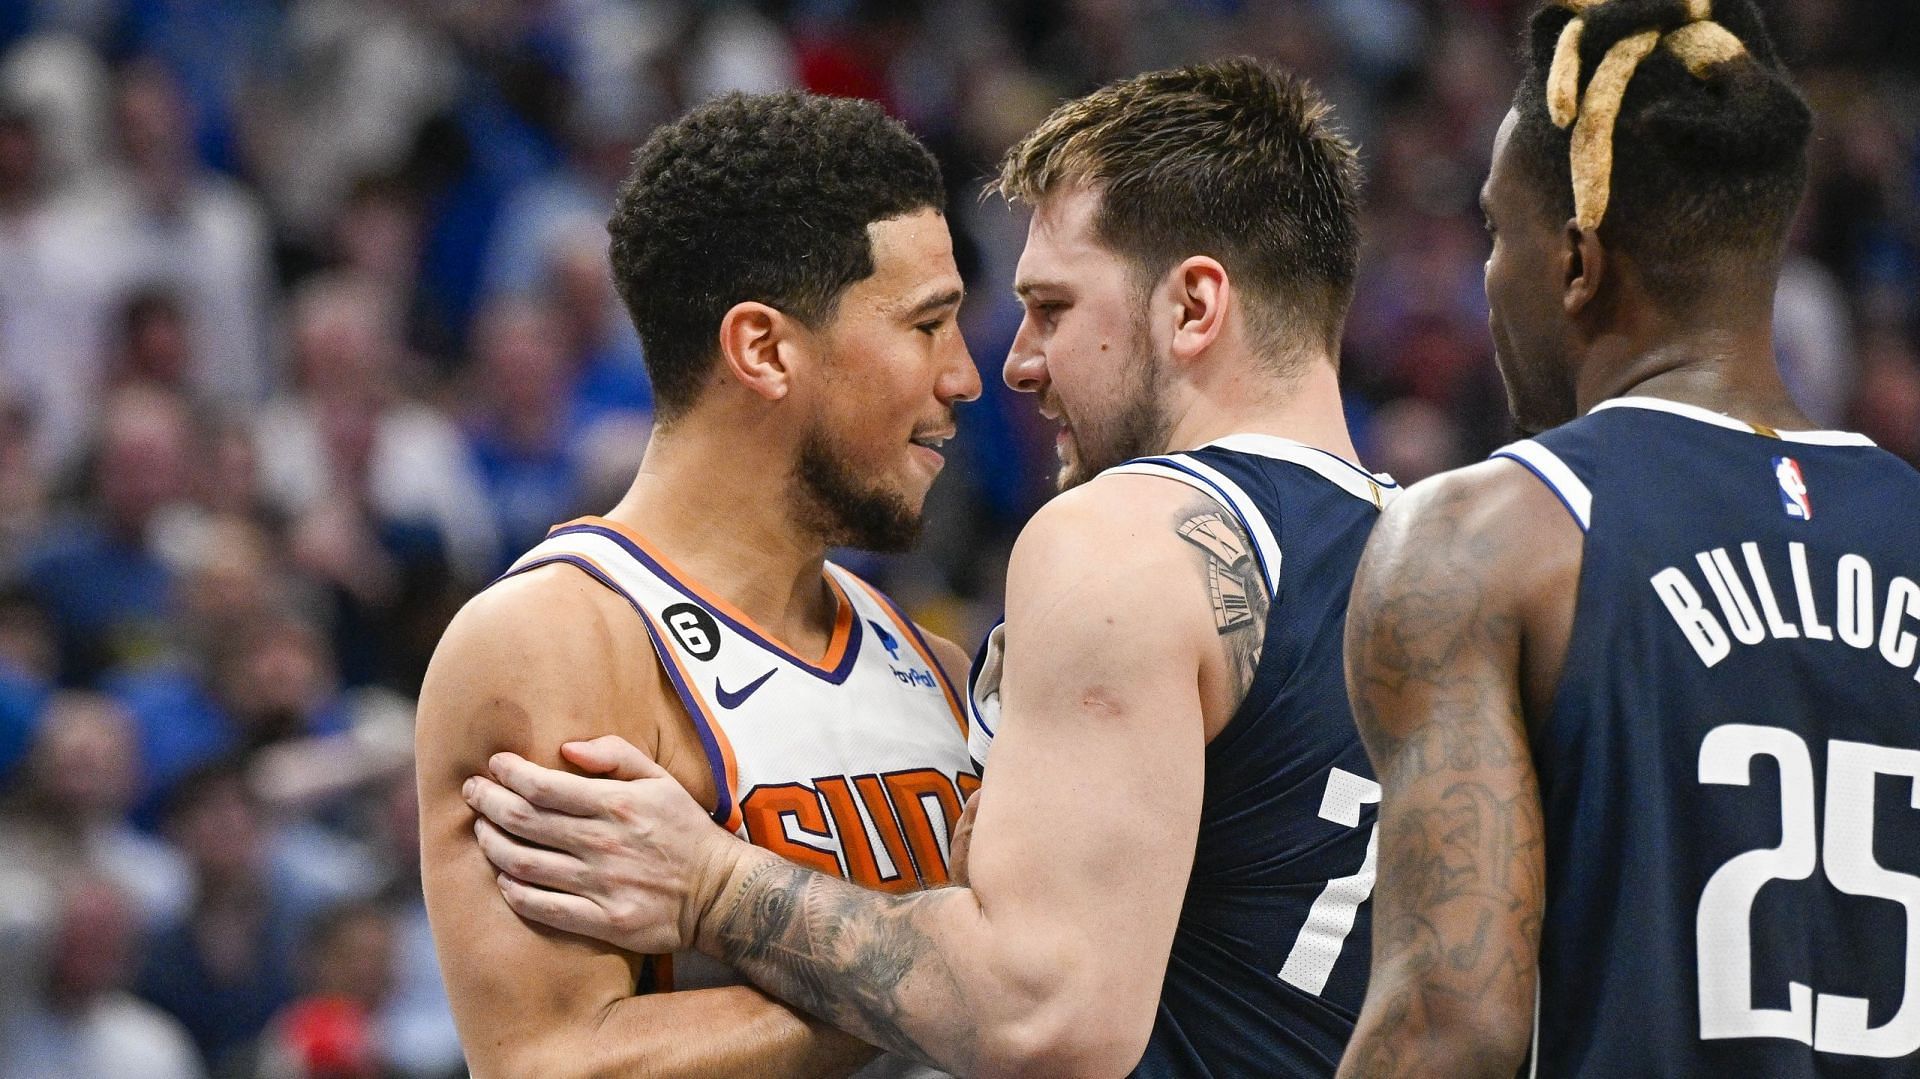 NBA stars Devin Booker and Luka Doncic during their fourth-quarter altercation on Sunday